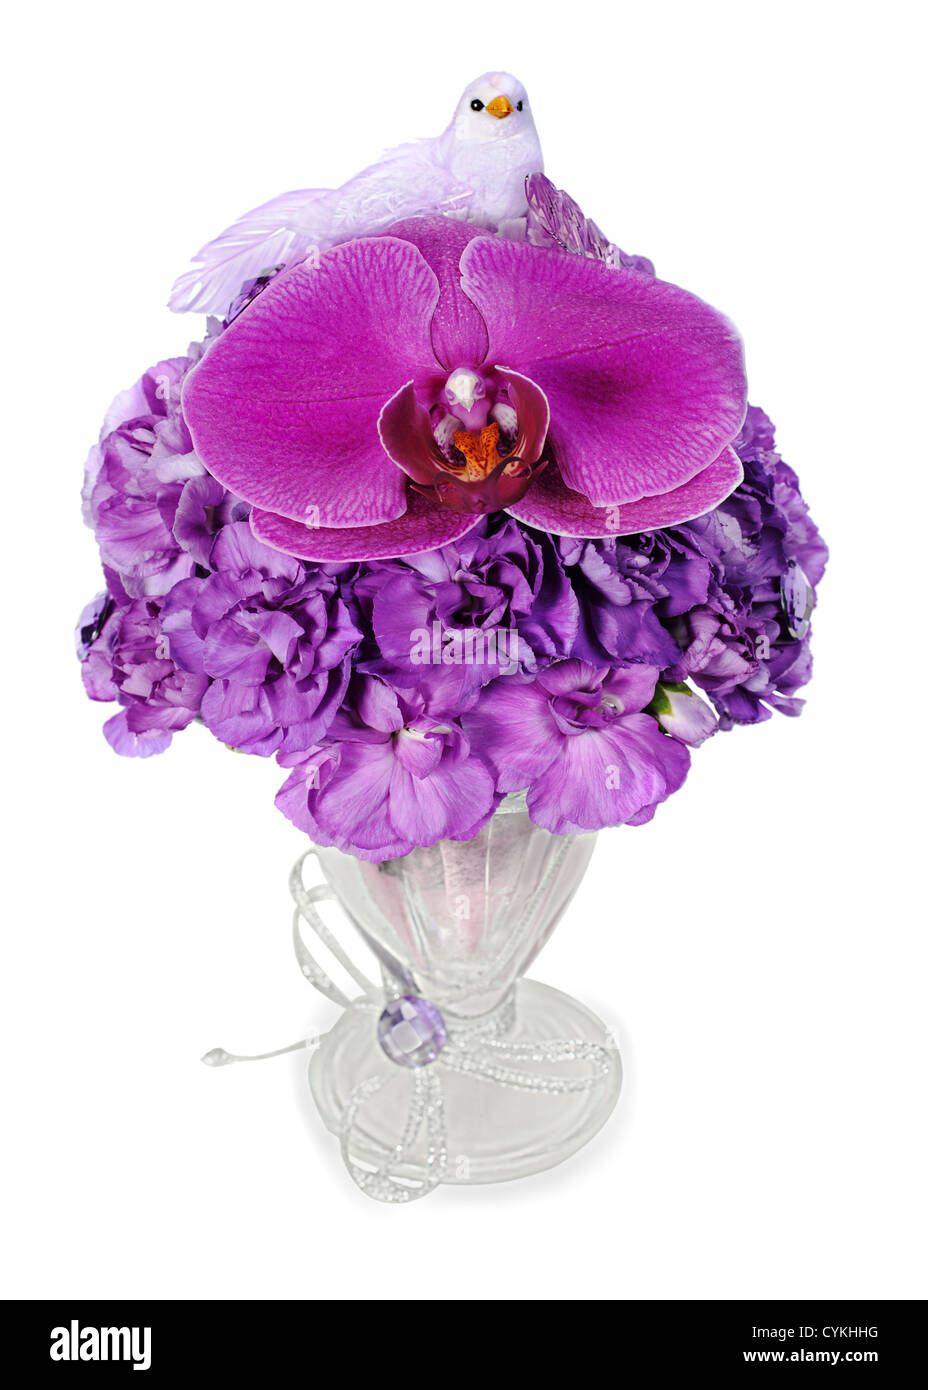 colorful arrangement of orchids, hydrangeas and blue birds held vertically in a glass vase, isolated on white background Stock Photo